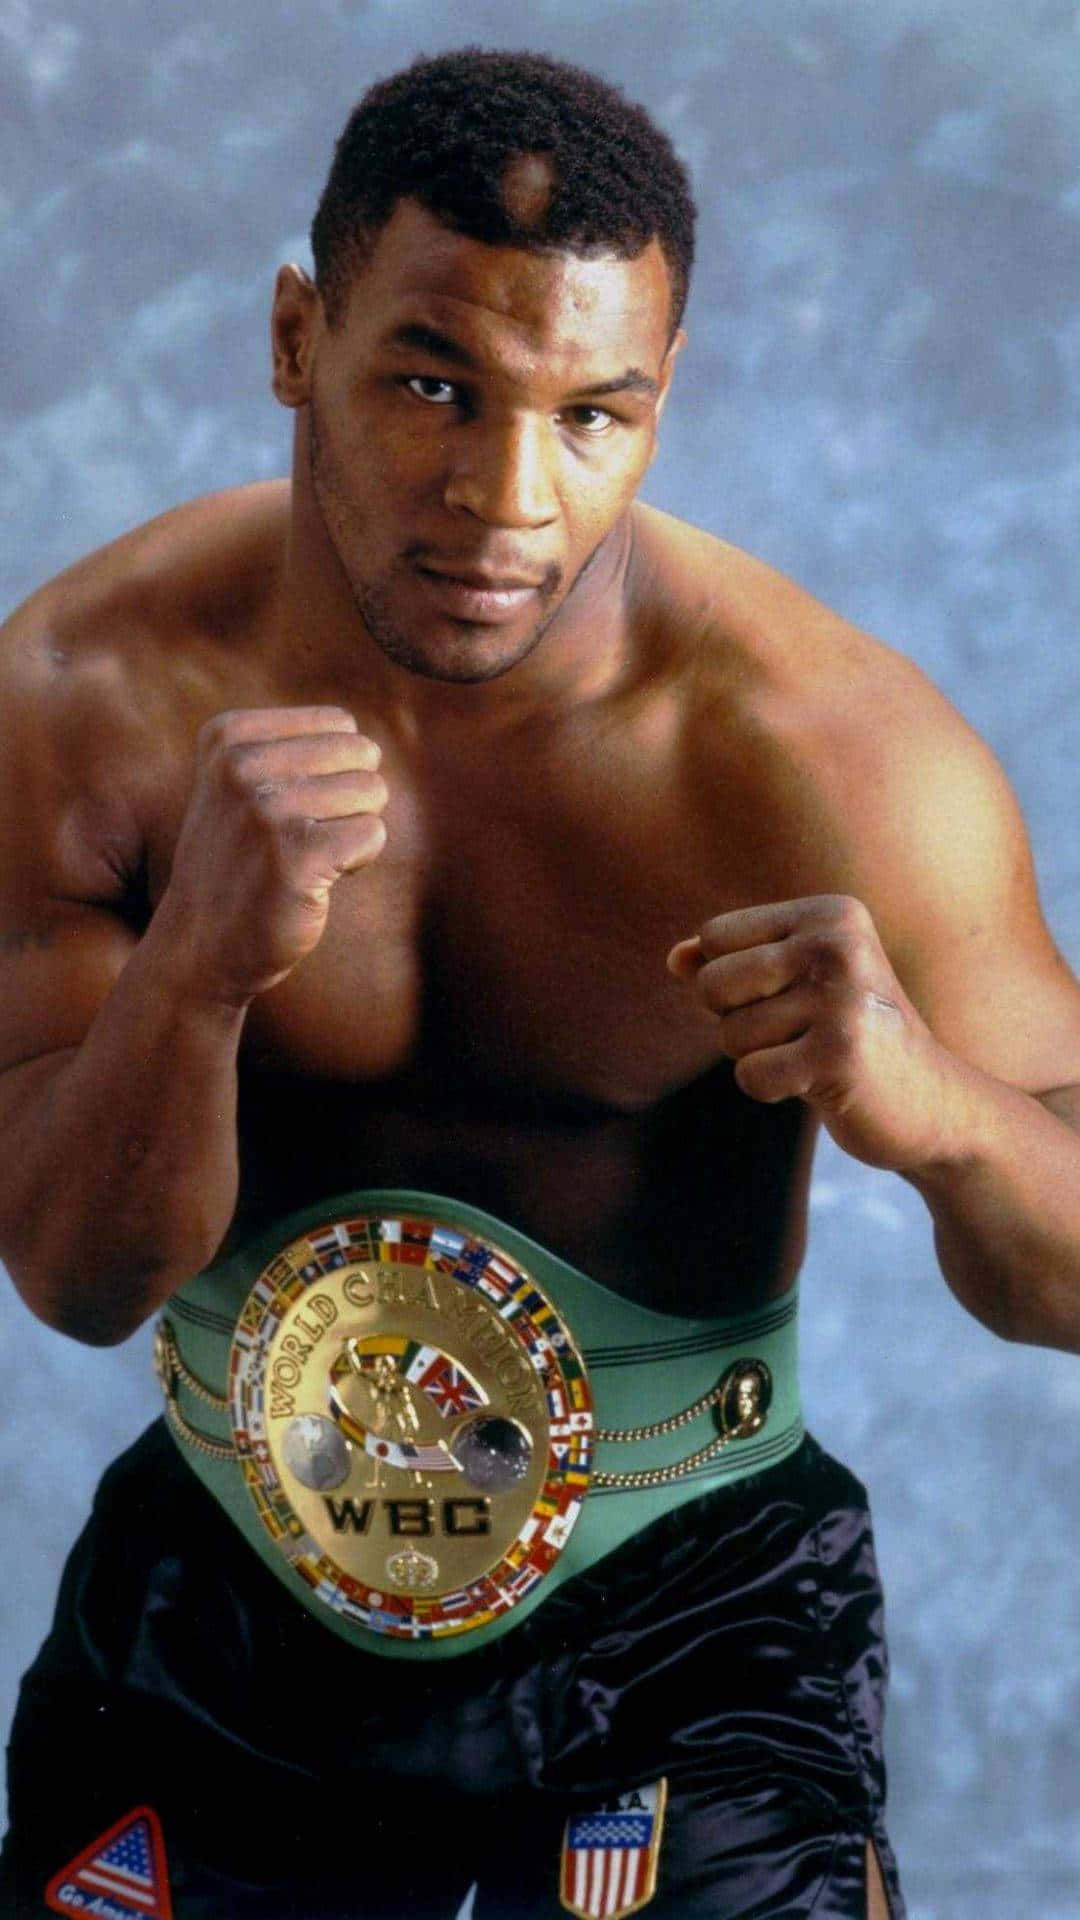 A powerful portrait of the boxing legend Mike Tyson